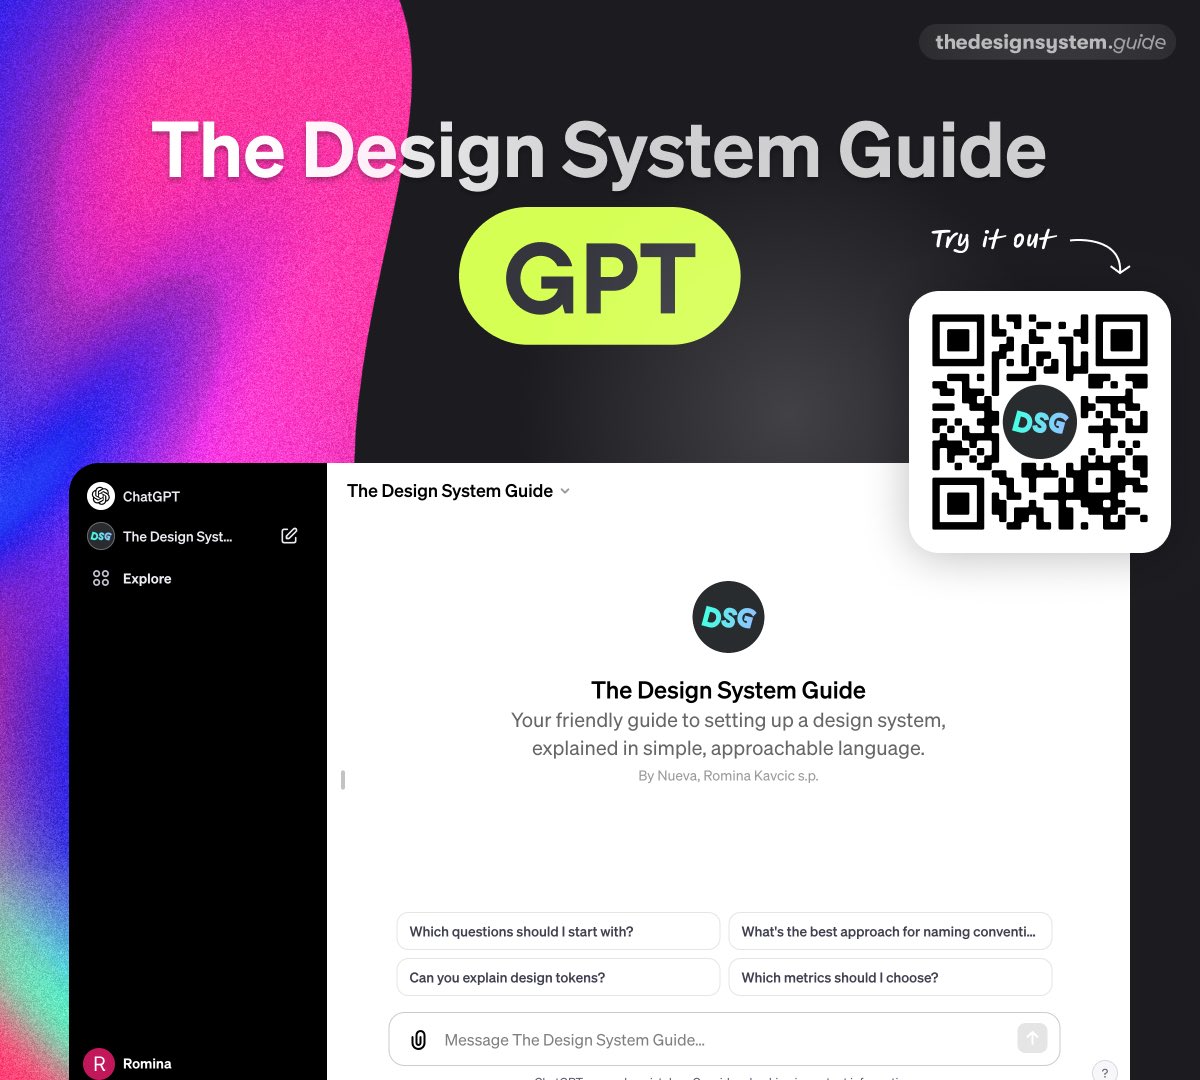 WOOHOO, I'm thrilled to unveil The Design System Guide GPT! ☄️ 
My guide is now like a magical toolbox. 😂 It's not just learning; it's an adventure into the world of design systems. 

#designsystem #GPT #designtokens #designmanagement #AI